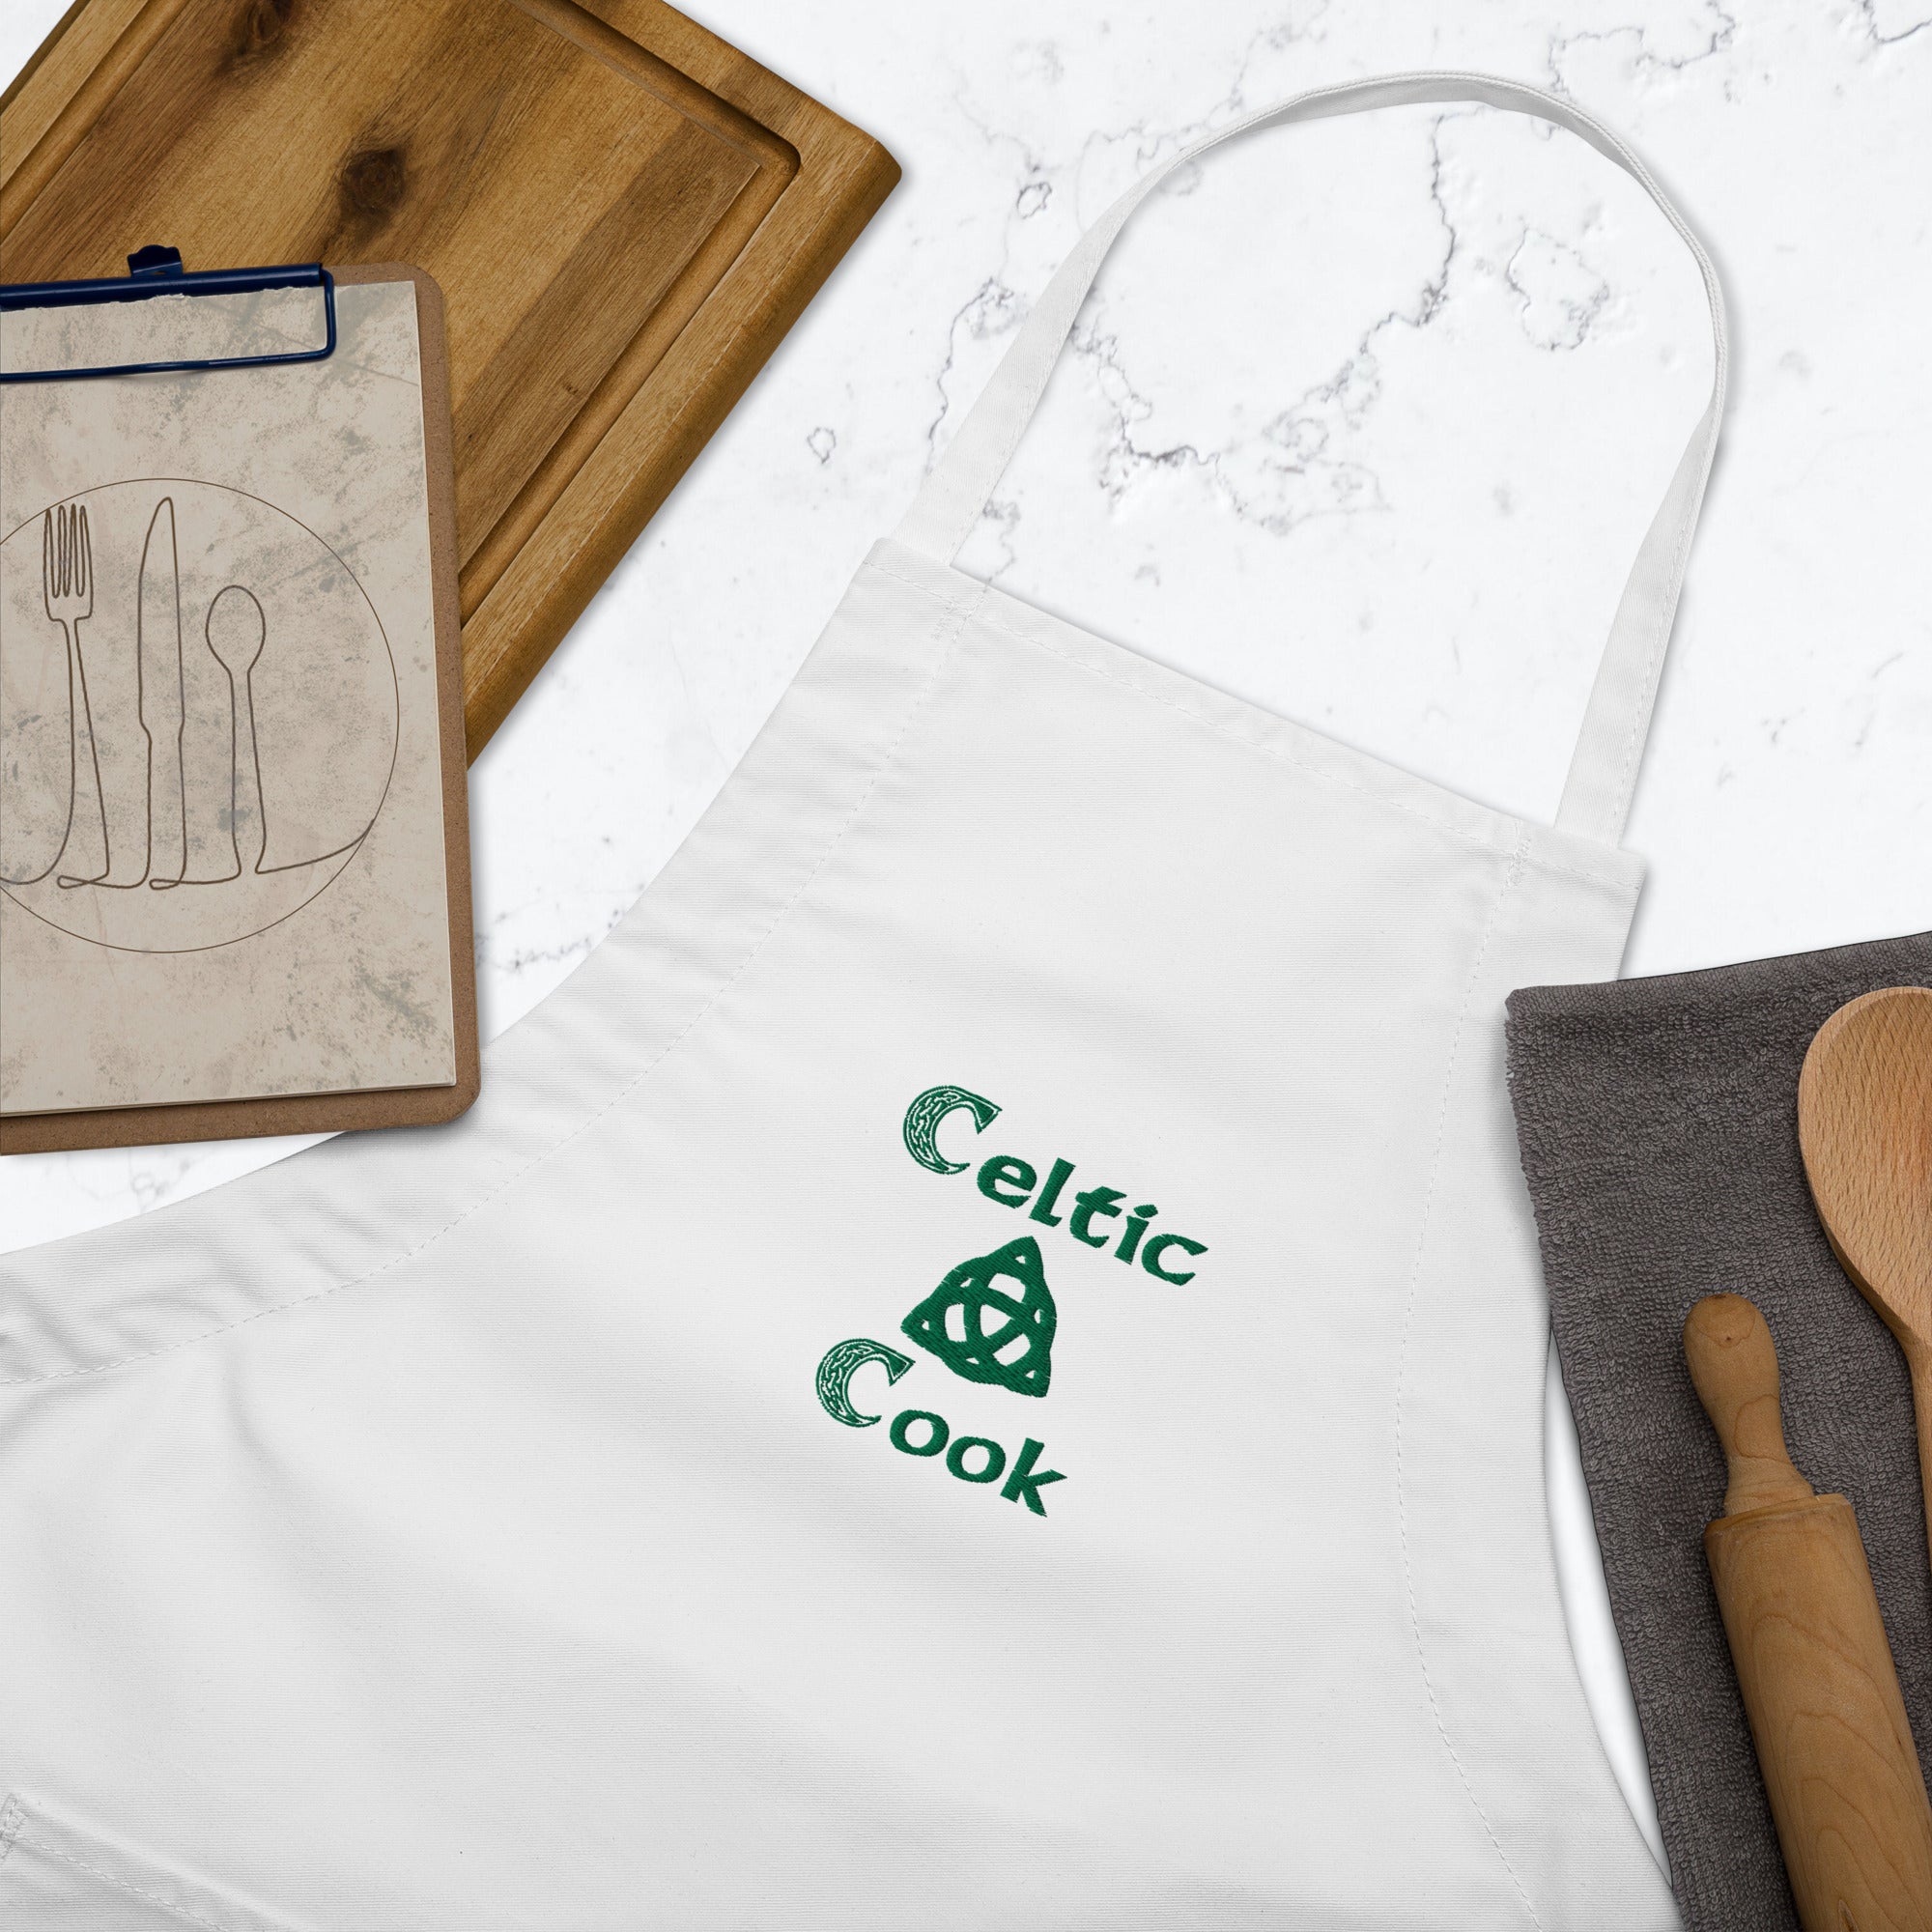 Celtic Cook Embroidered Apron